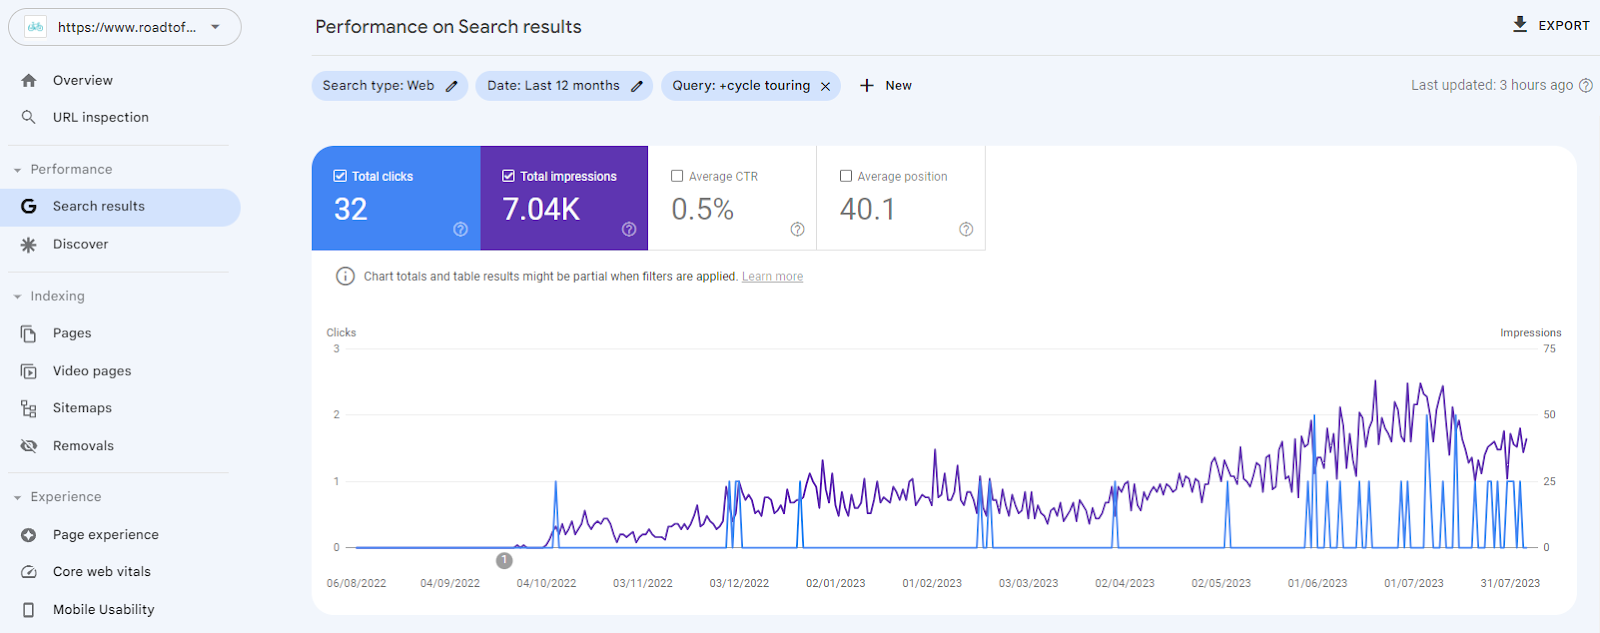 Screenshot from Google search console showing an upward trend of impressions. This demonstrates how topic authority and content clusters build website visibility